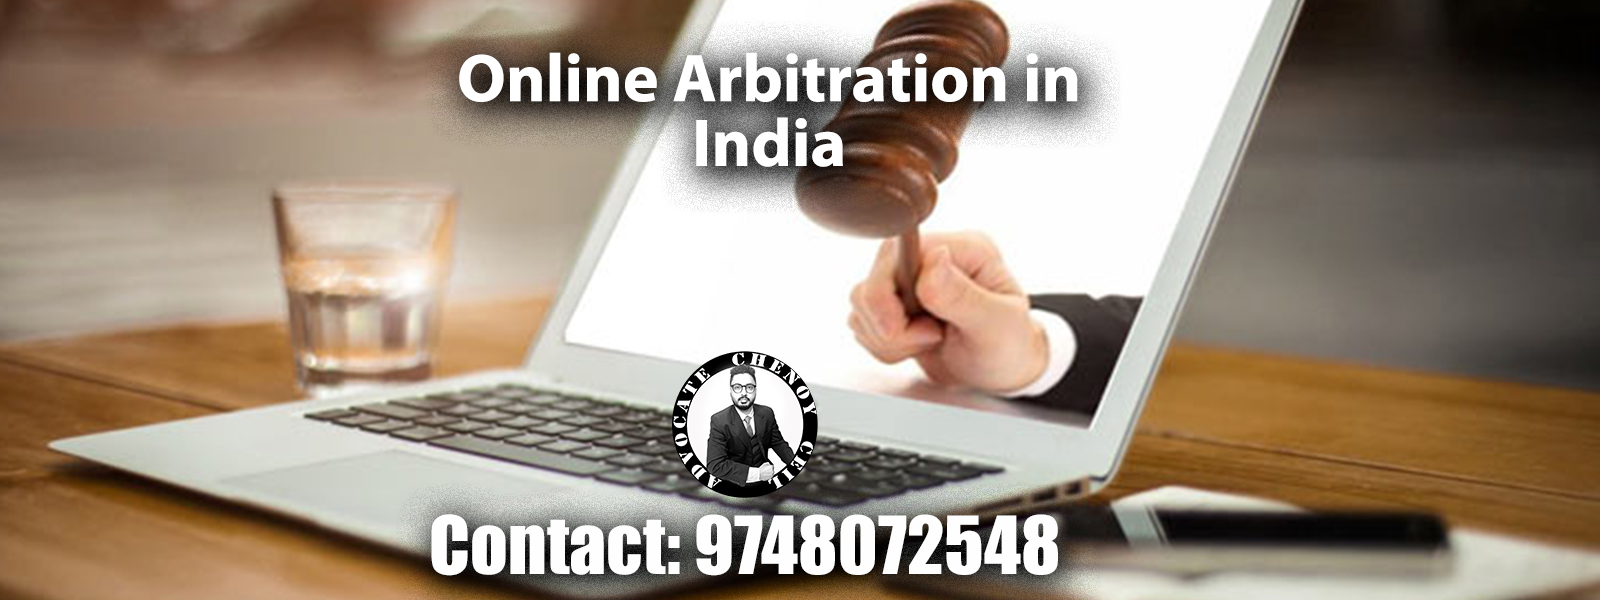 Online Arbitration in India